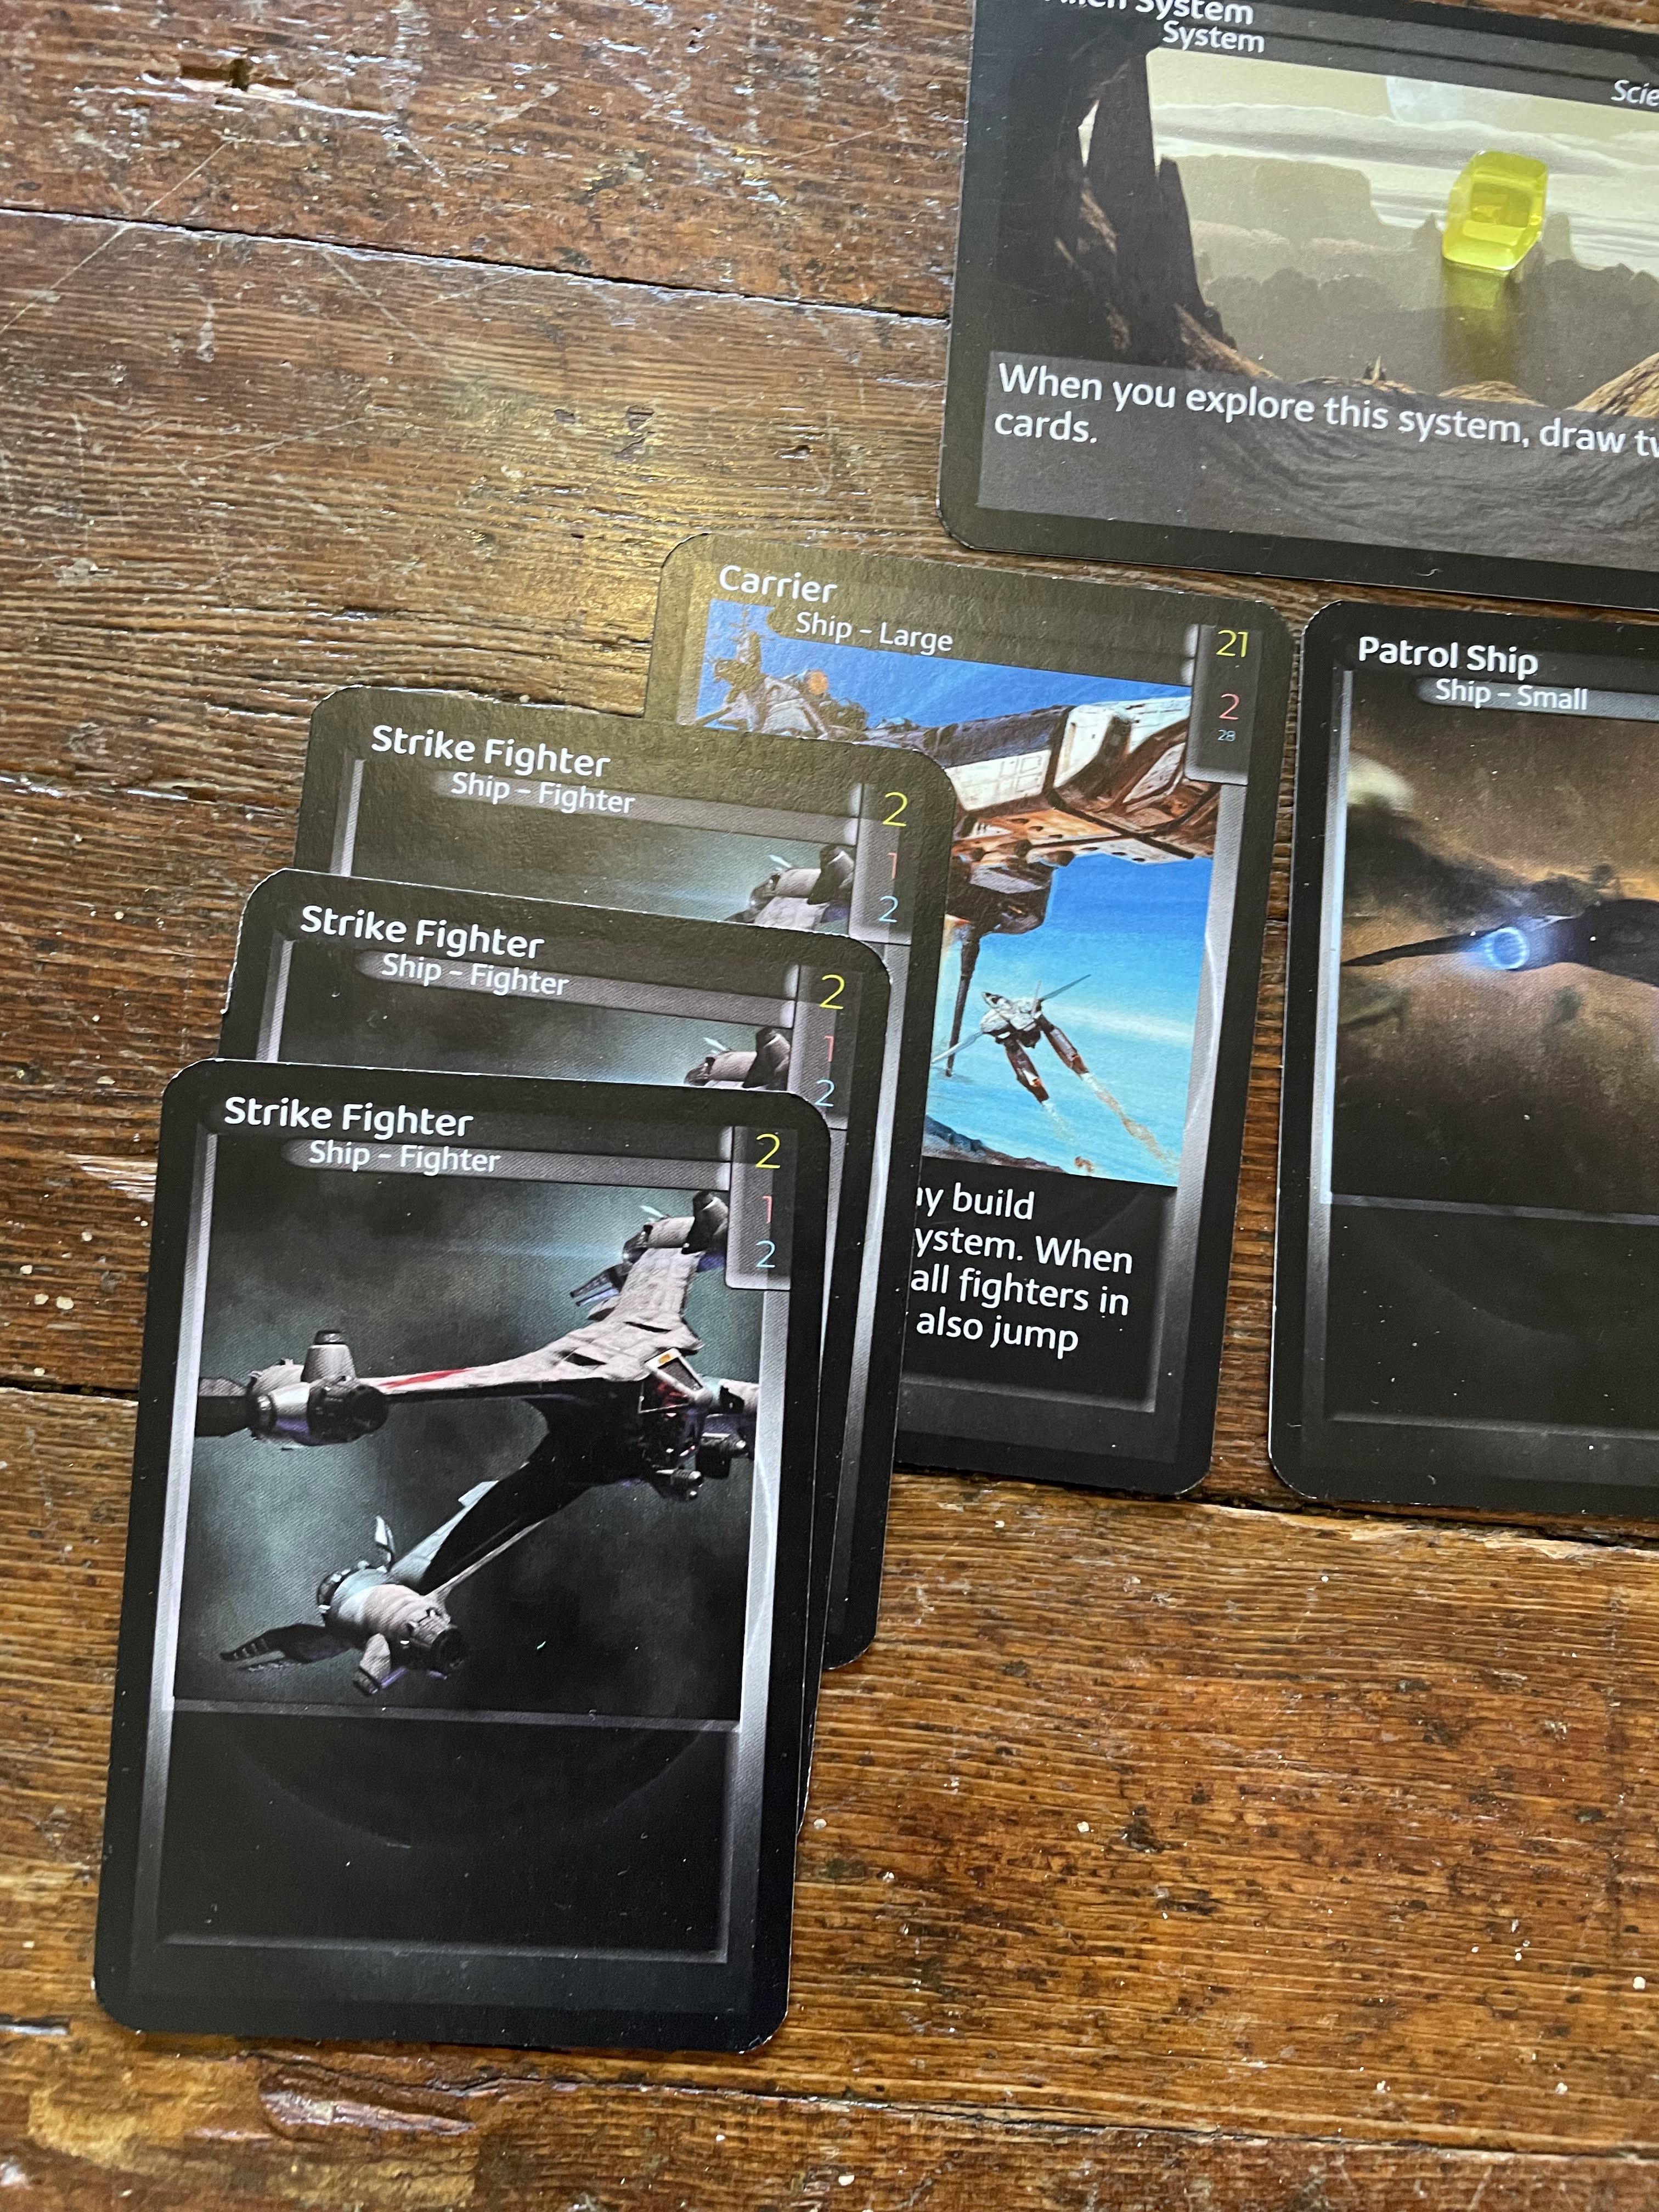 Three fighter cards are now stacked on top of the Carrier.